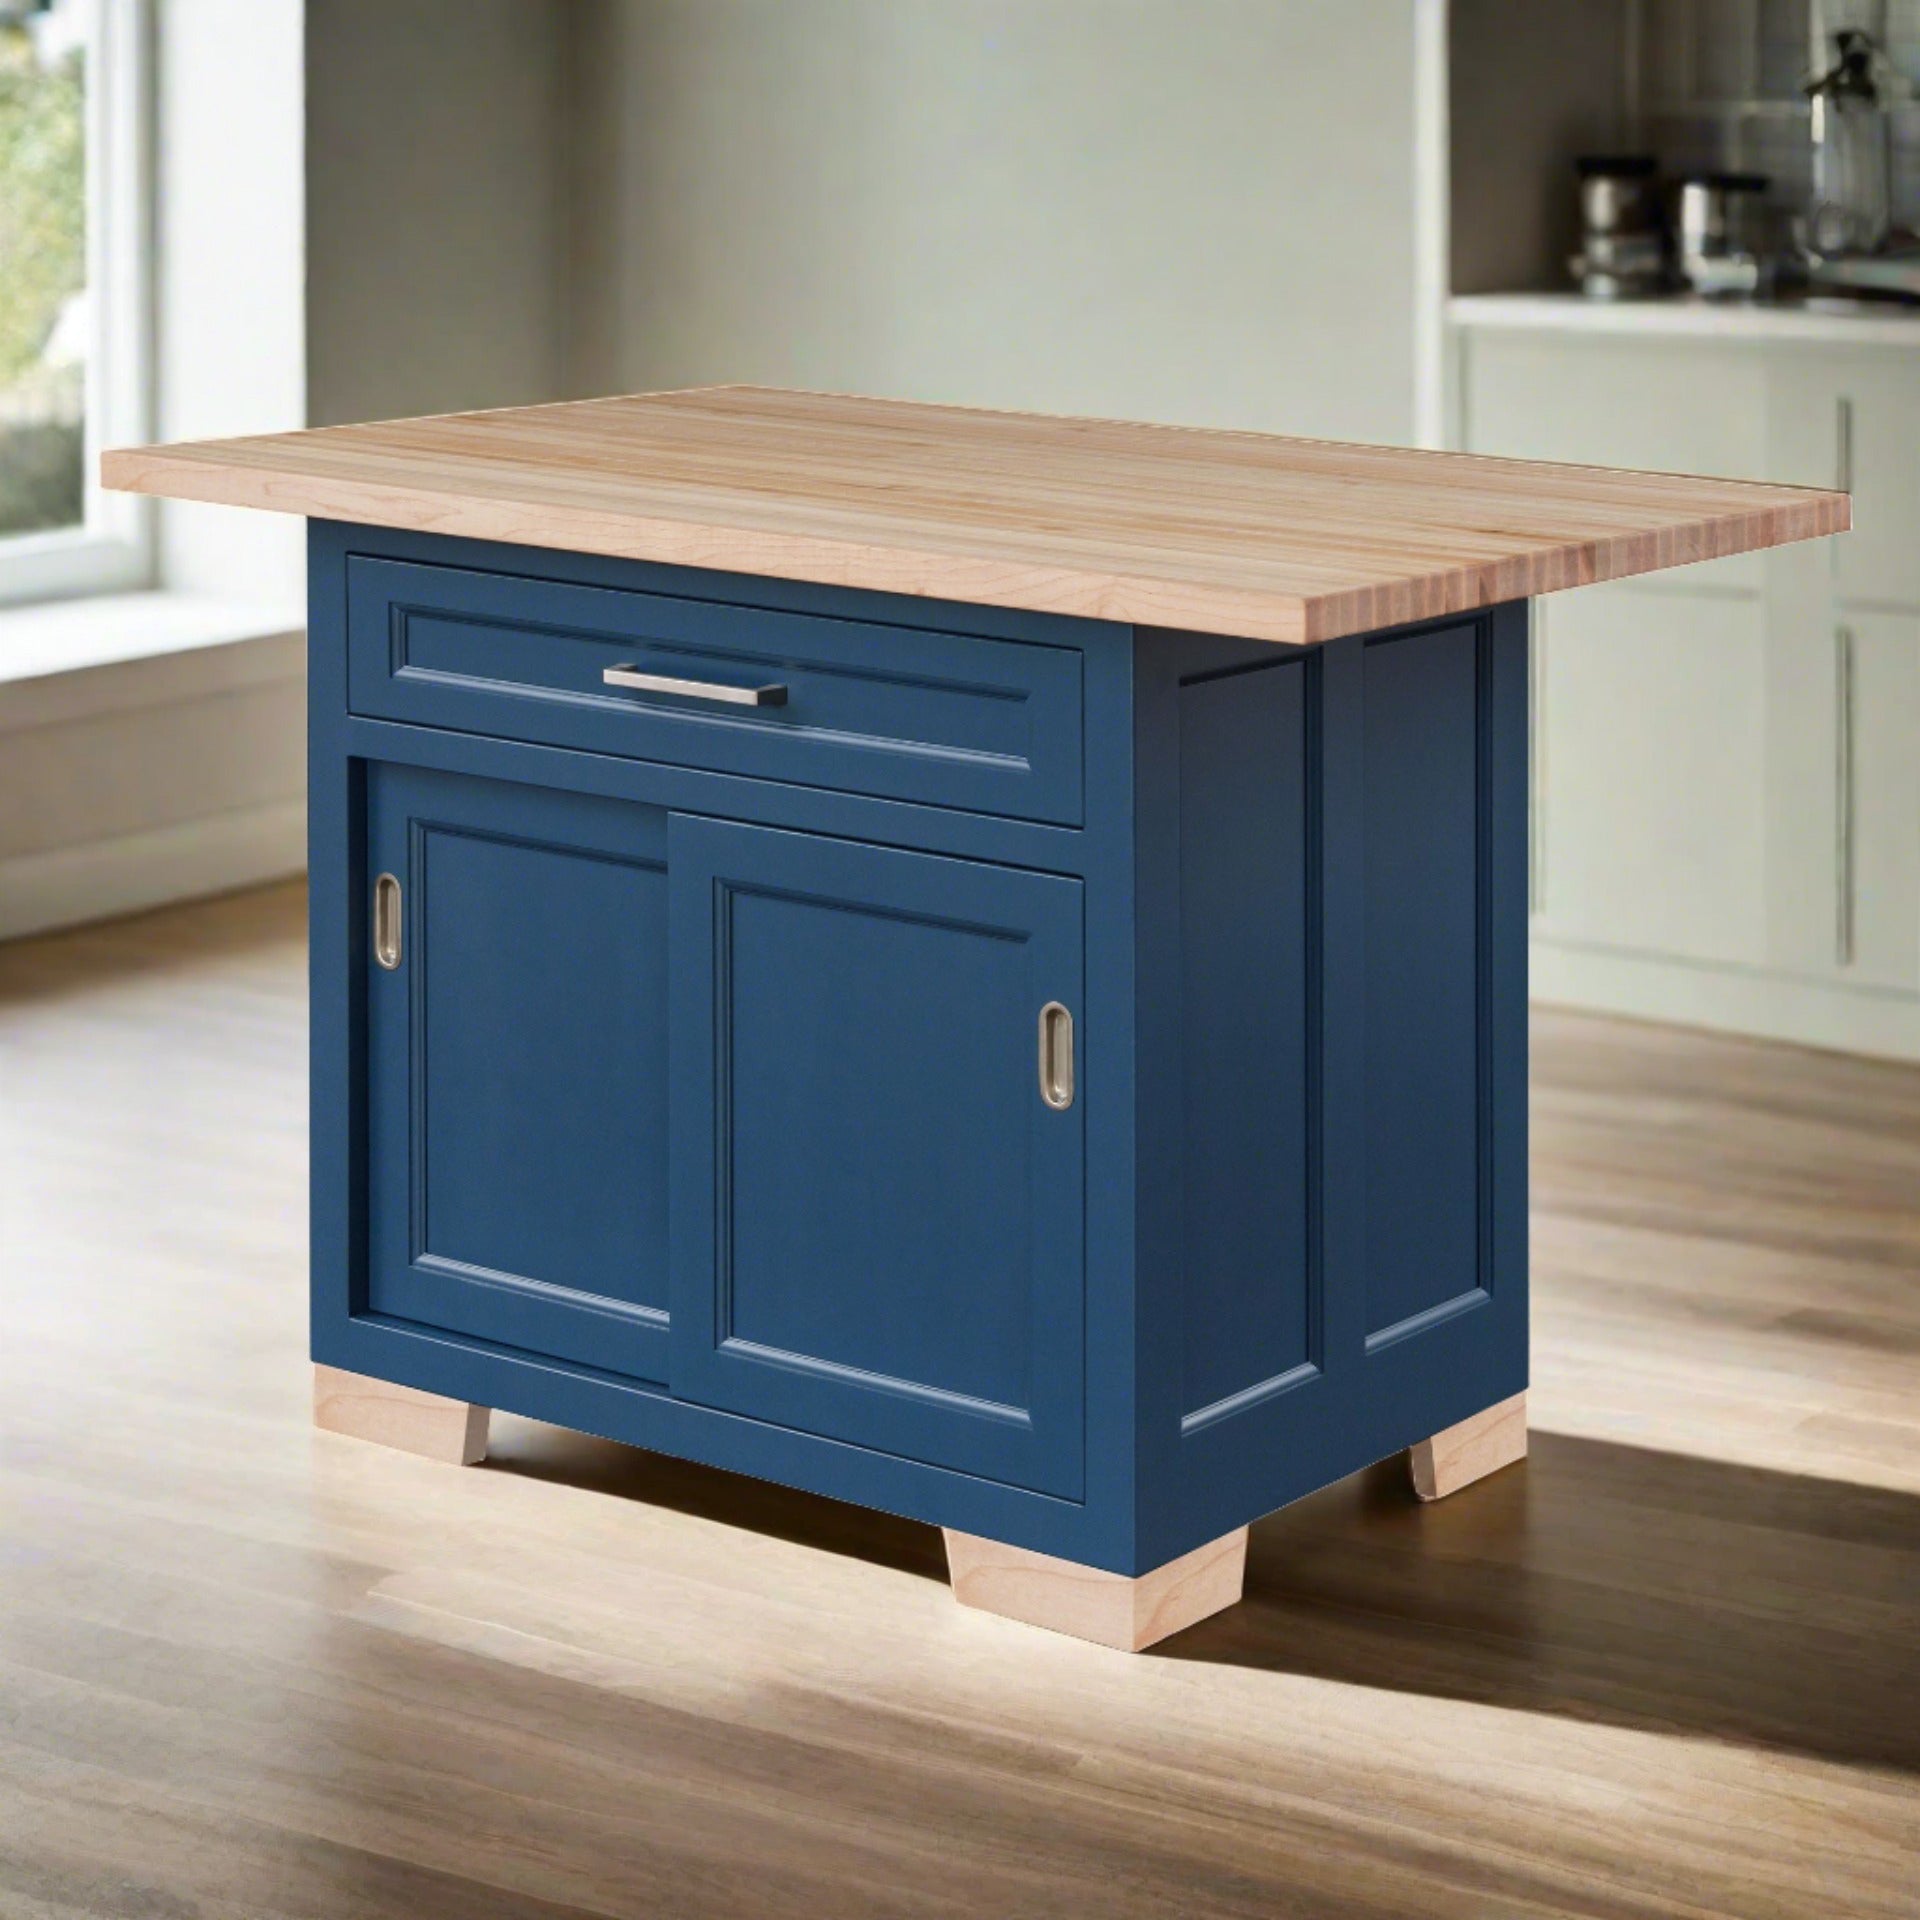 Amish Hudson 52" Small Butcher Block Kitchen Island - Royal Blue - As Shown - snyders.furniture